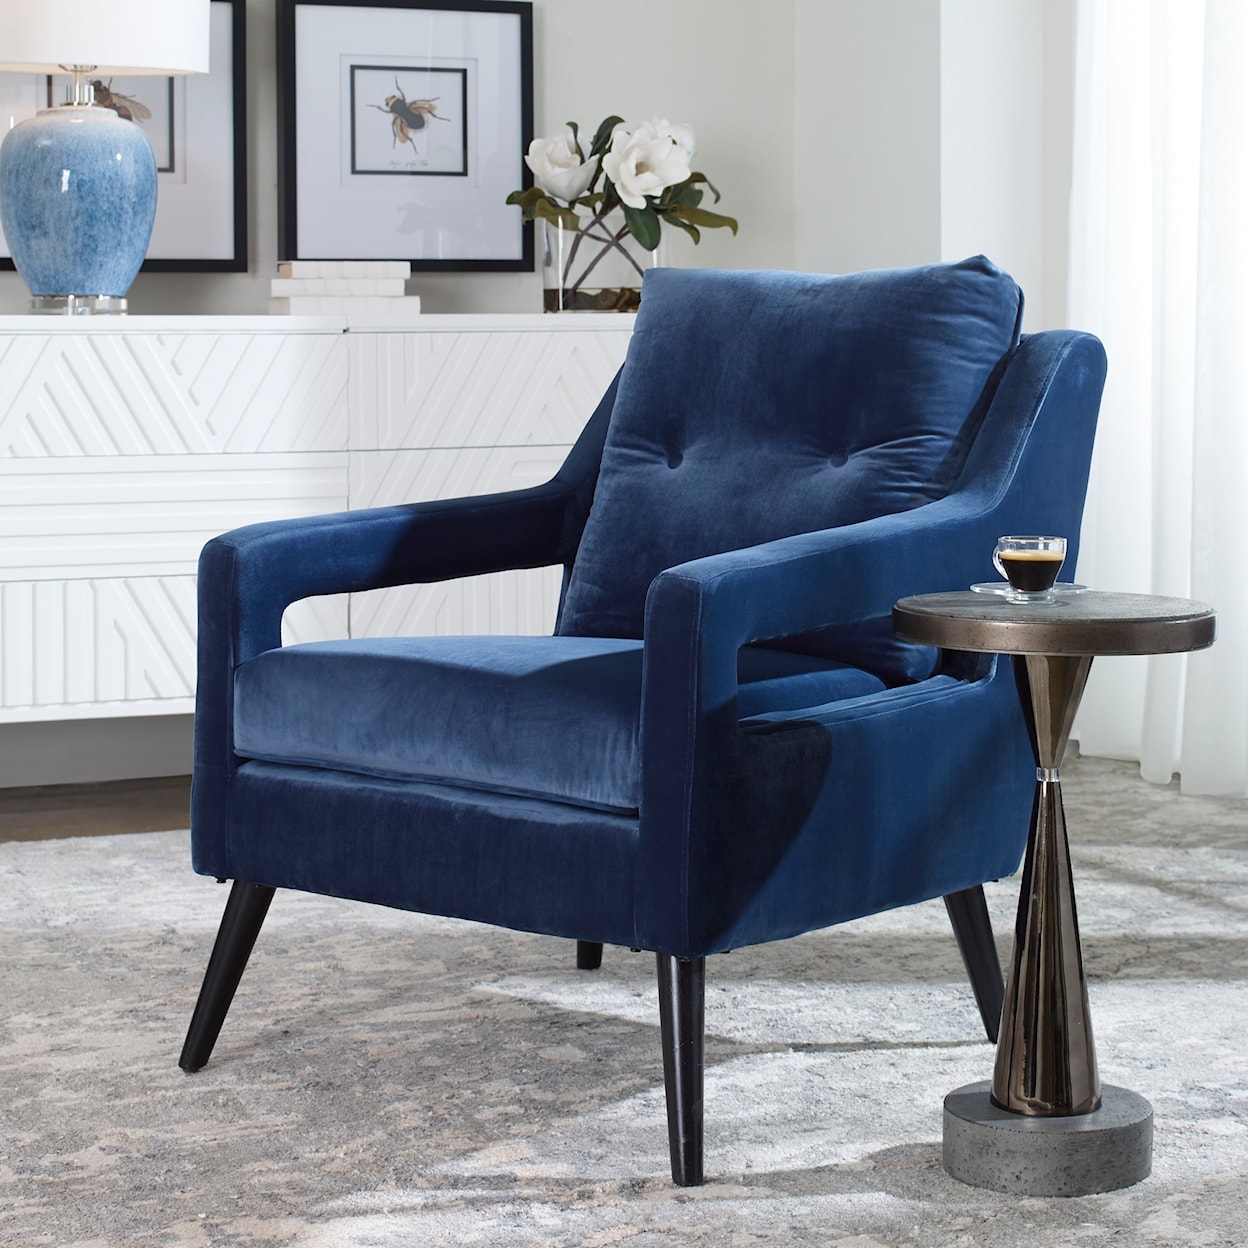 Uttermost Accent Furniture - Accent Chairs O'Brien Armchair